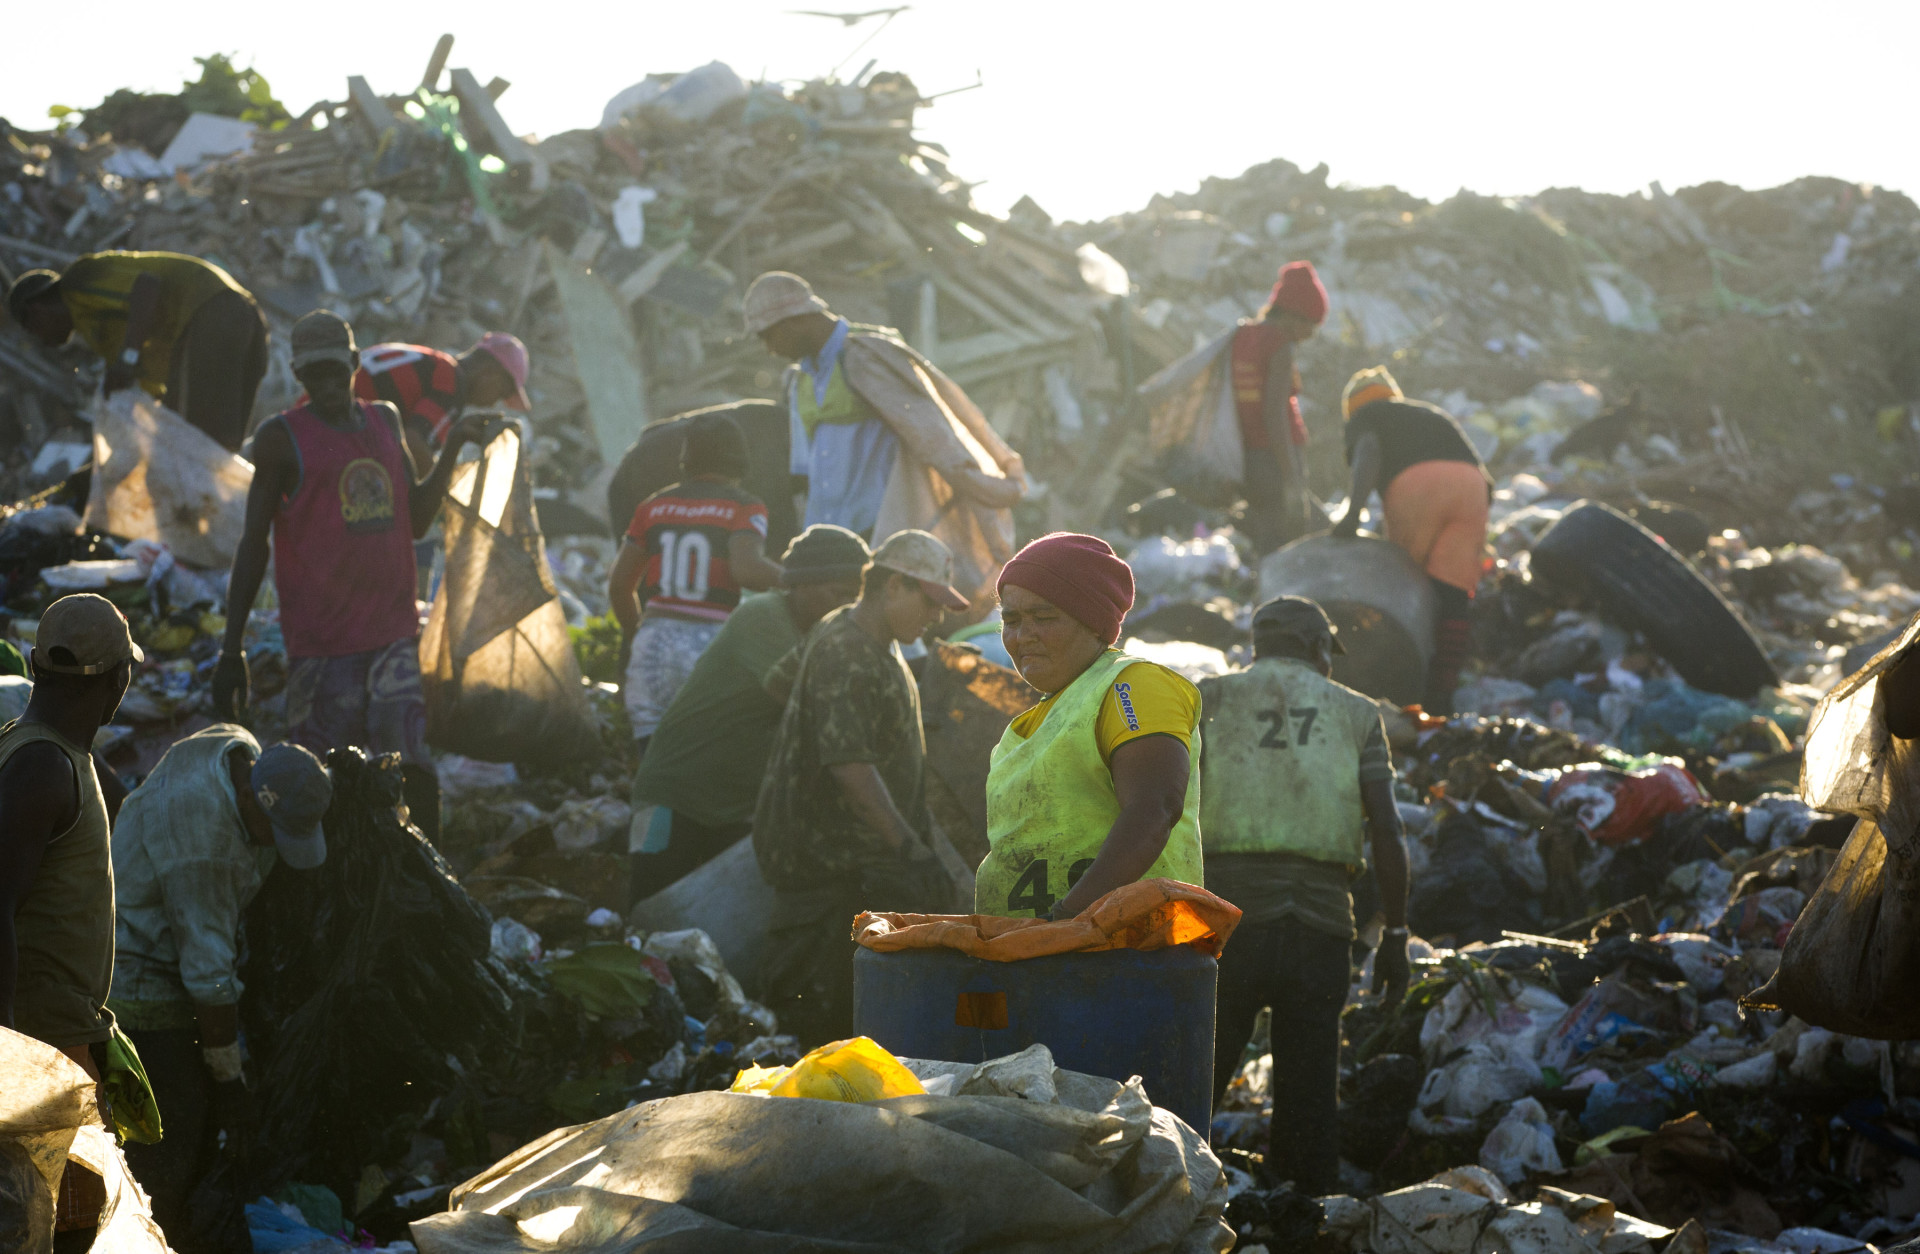 In this May 29, 2012 photo, people collect recyclable materials at Jardim Gramacho, one of the world's largest open-air landfills, in Rio de Janeiro, Brazil. Jardim Gramacho, a vast, seaside mountain of trash where thousands of people made a living sorting through the debris by hand, is closing after three decades in service. (AP Photo/Victor R. Caivano)